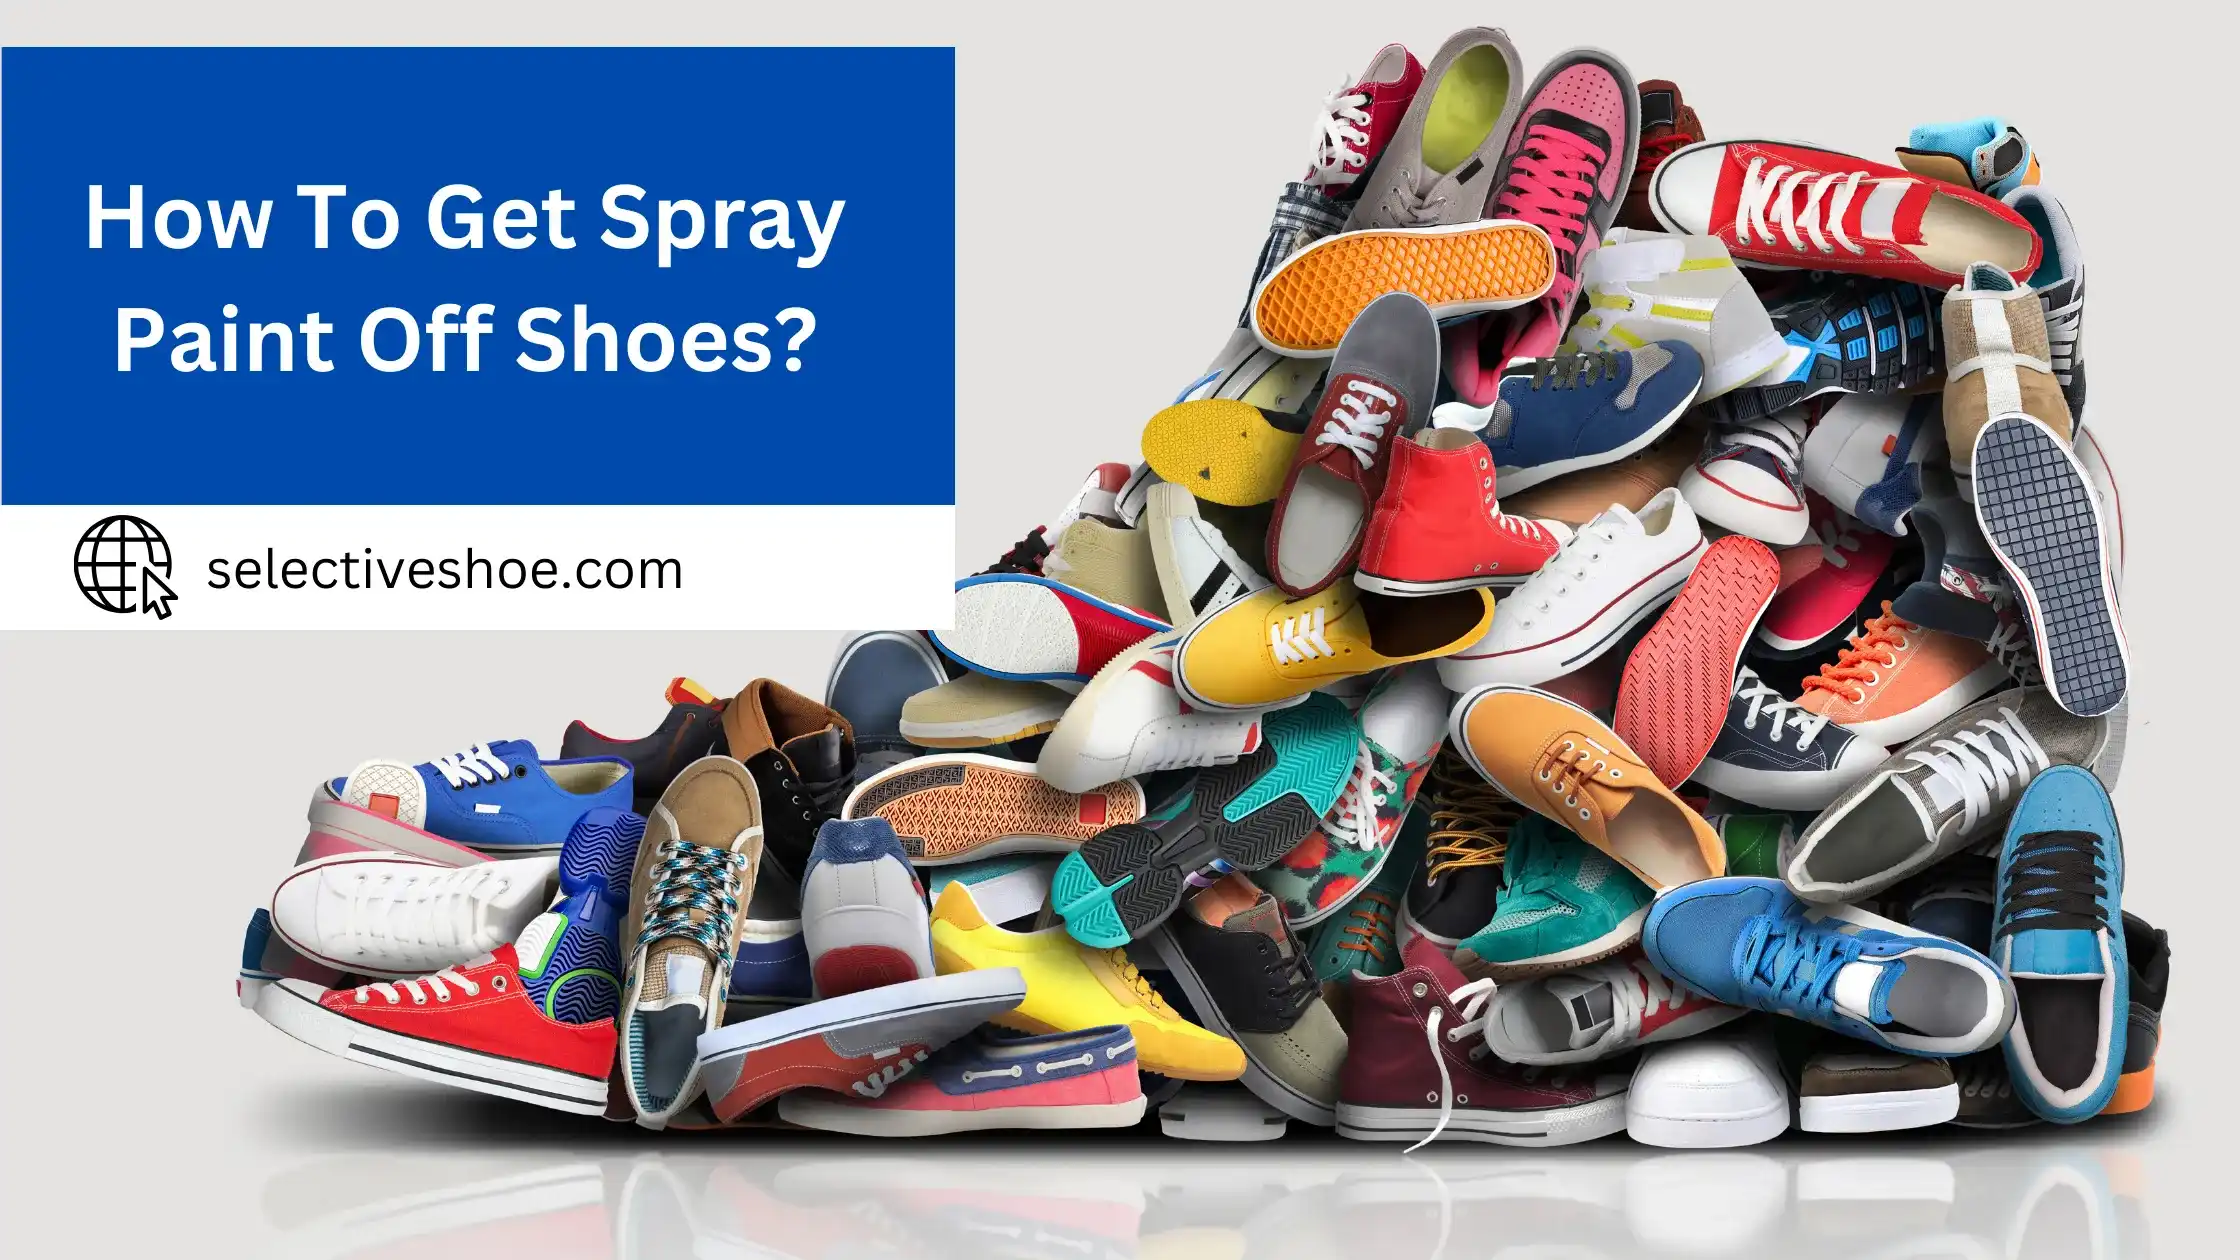 How To Get Spray Paint Off Shoes? Expert Pro Tips